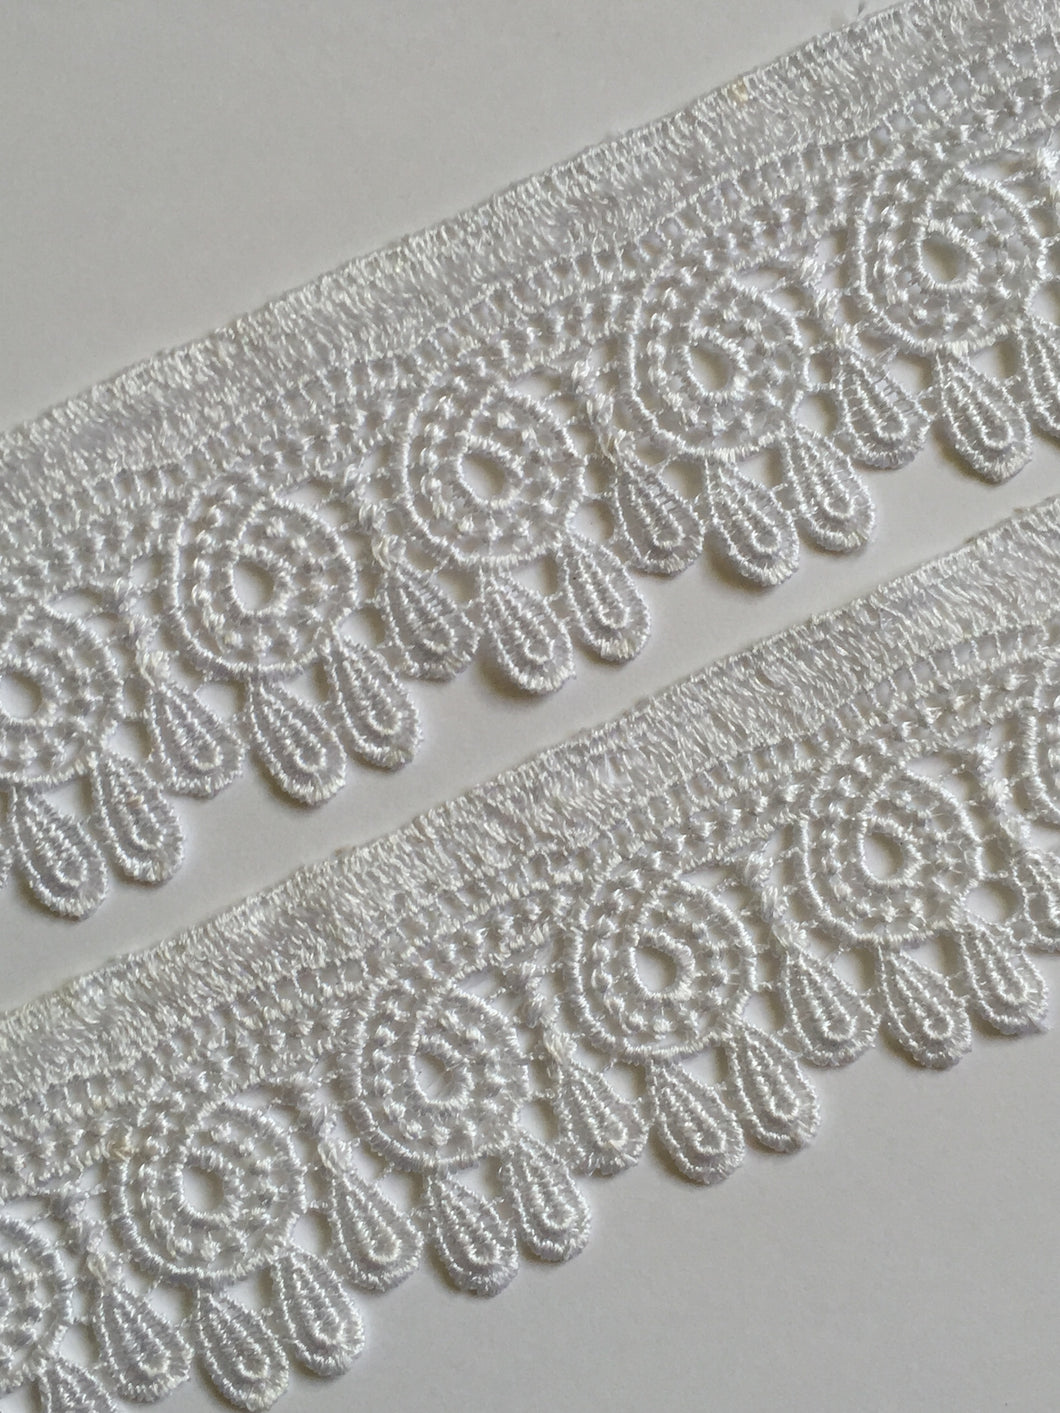 1 yard WHITE #4 Lace Trims 52mm Wide Embroidered Guipure Trimmings Cardmaking Wedding Home Decor Sewing Craft Projects